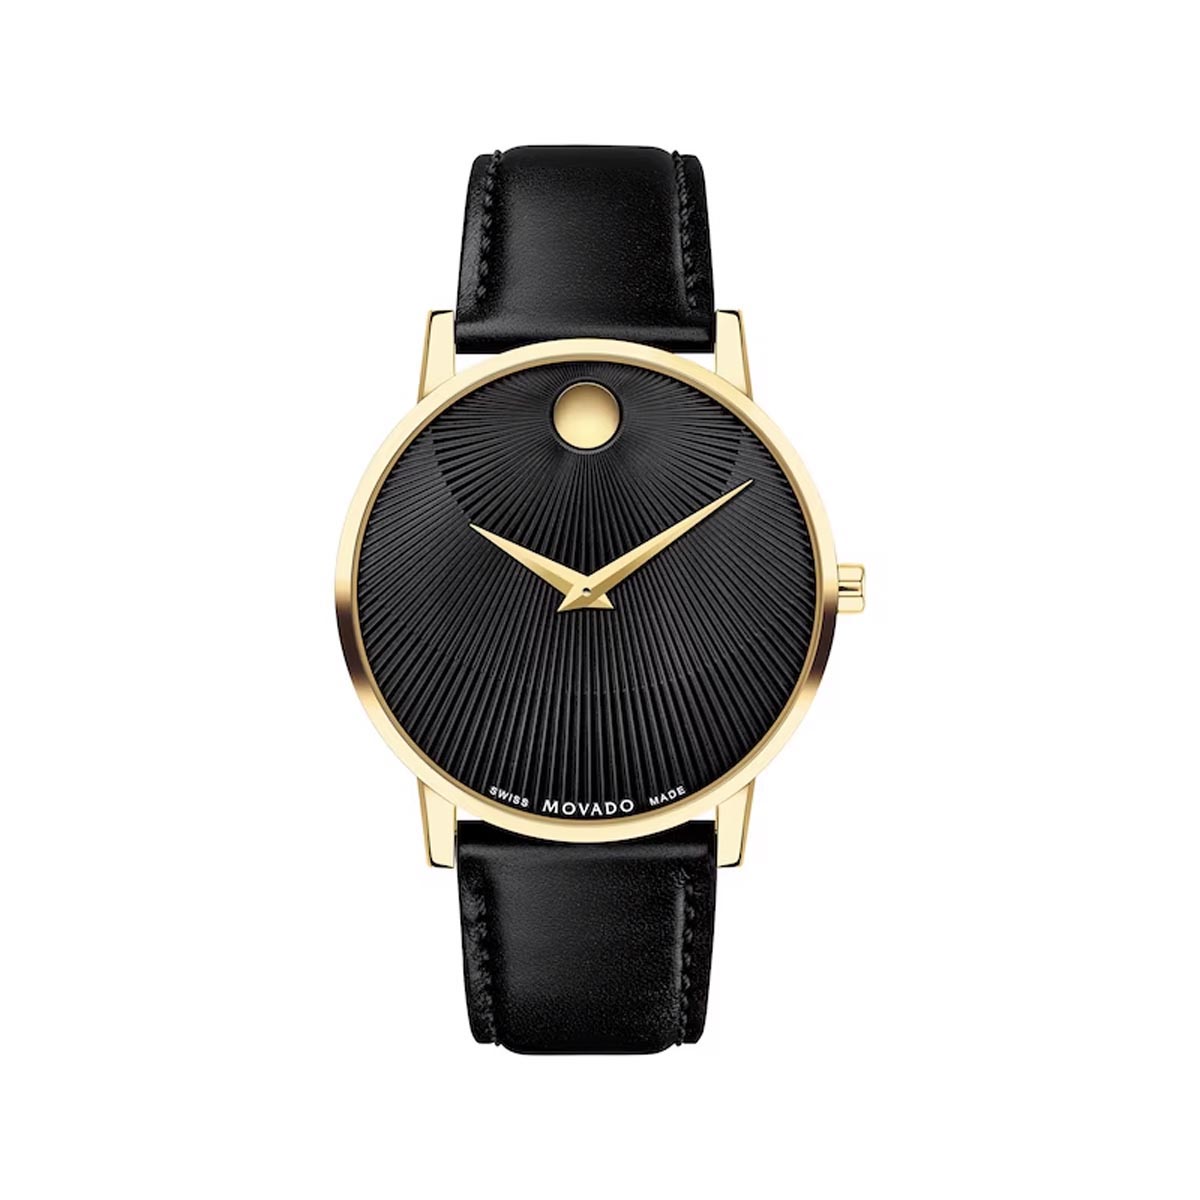 Movado Museum Classic Watch with Textured Black Dial and Black Leather Strap (Swiss quartz movement)